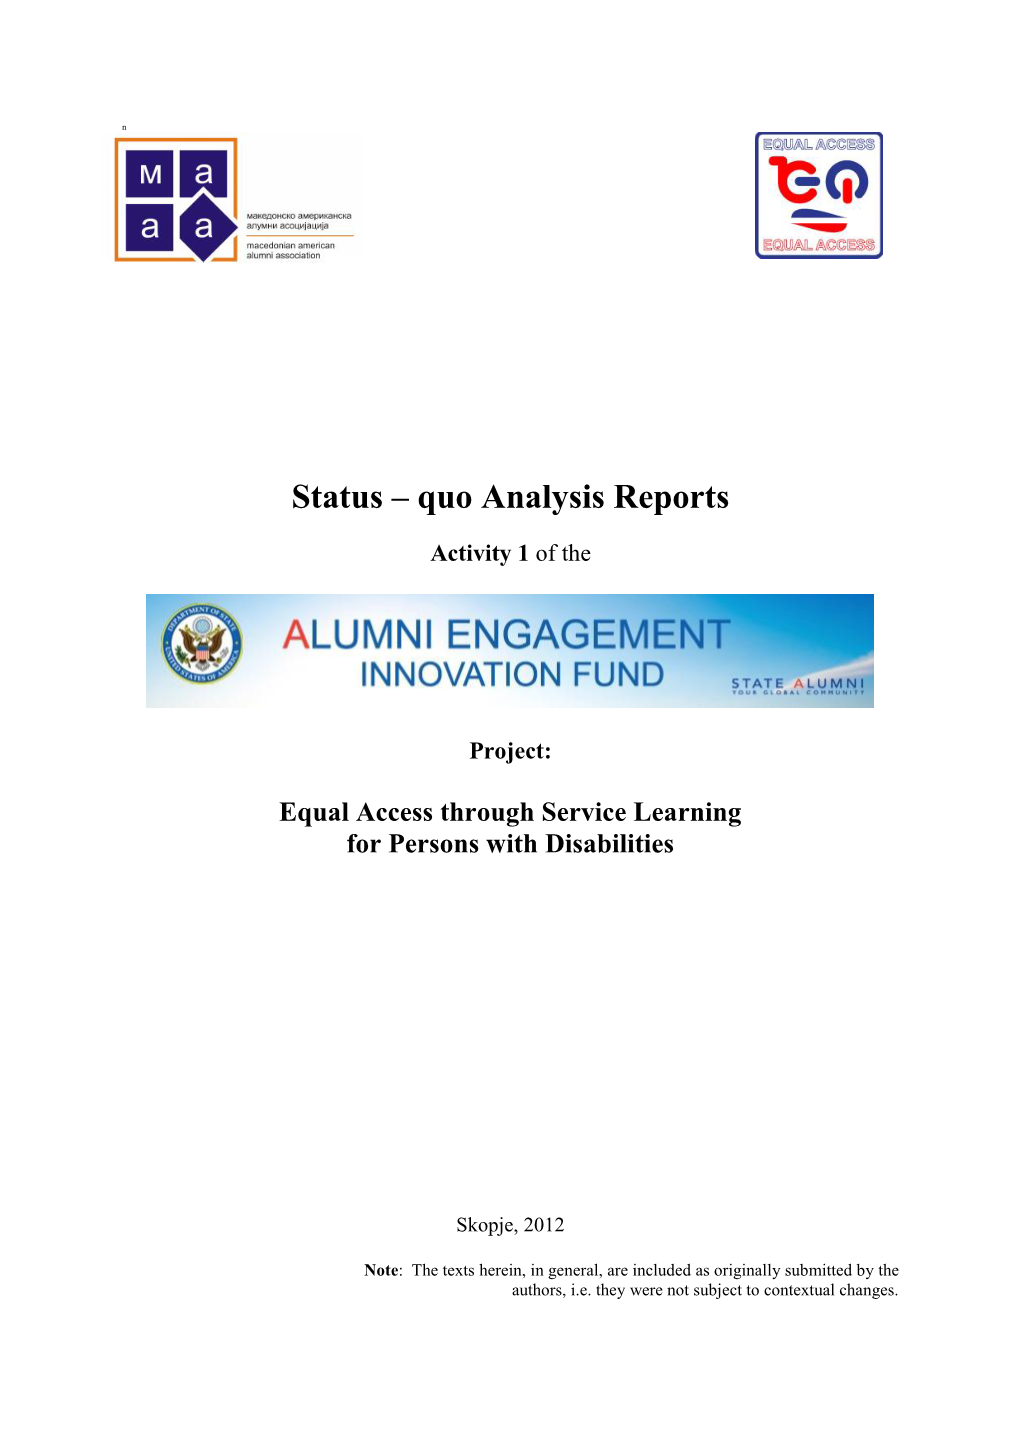 Report of the Accessibility of the Higher Education Institutions and Other Relevant Public Institutions in Strumica and Gevgelija